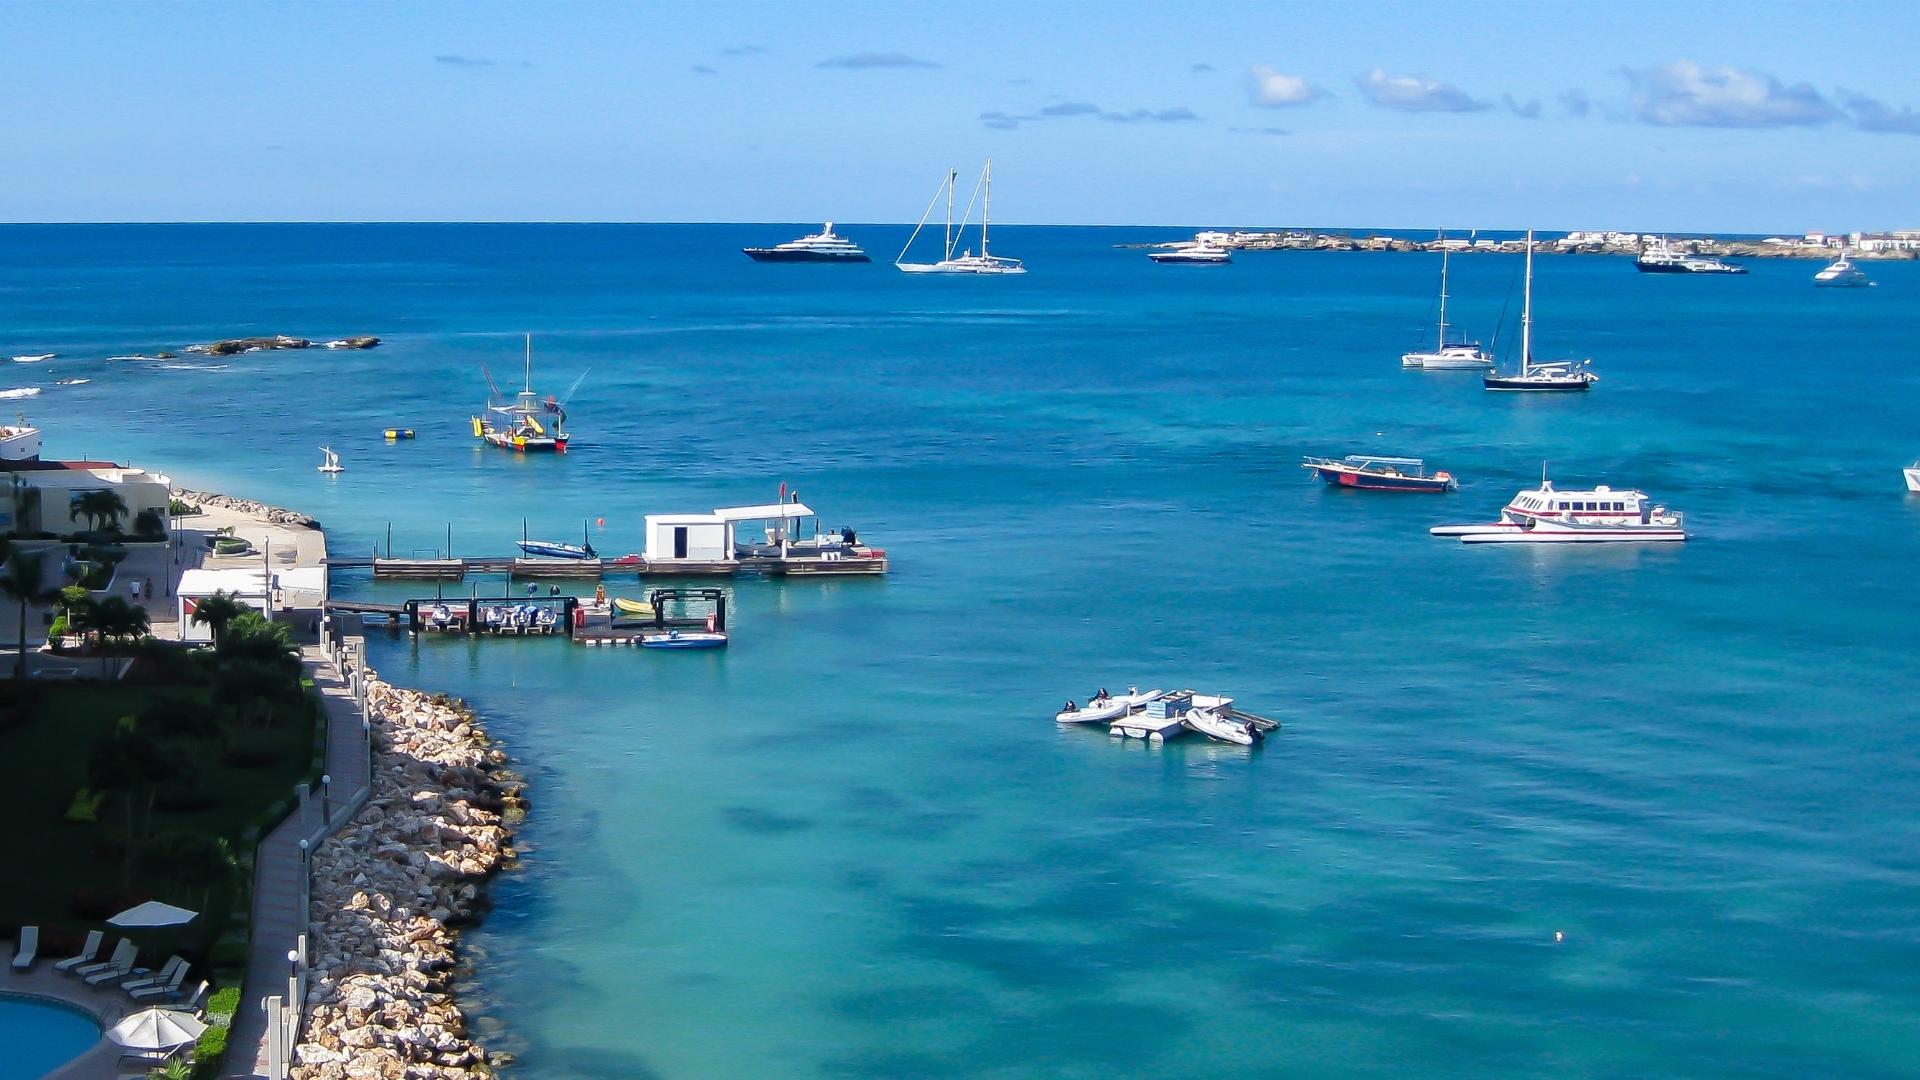 St Martin - Charter a luxury yacht in St Martin or St Barth